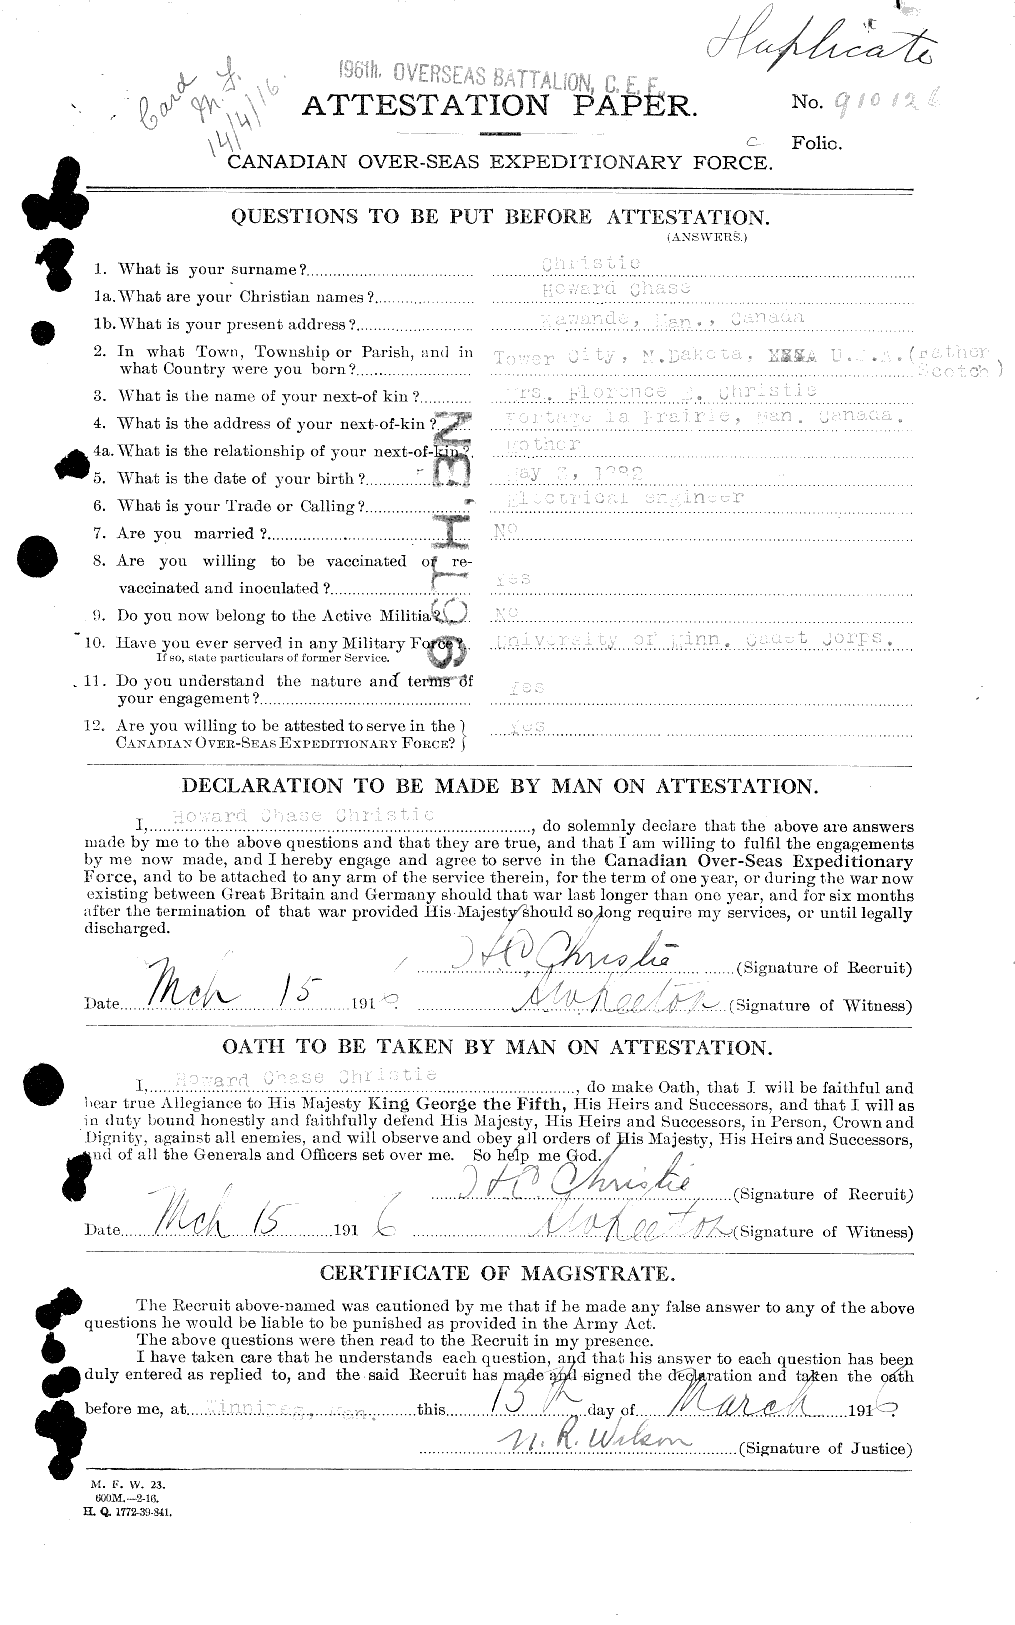 Personnel Records of the First World War - CEF 021966a